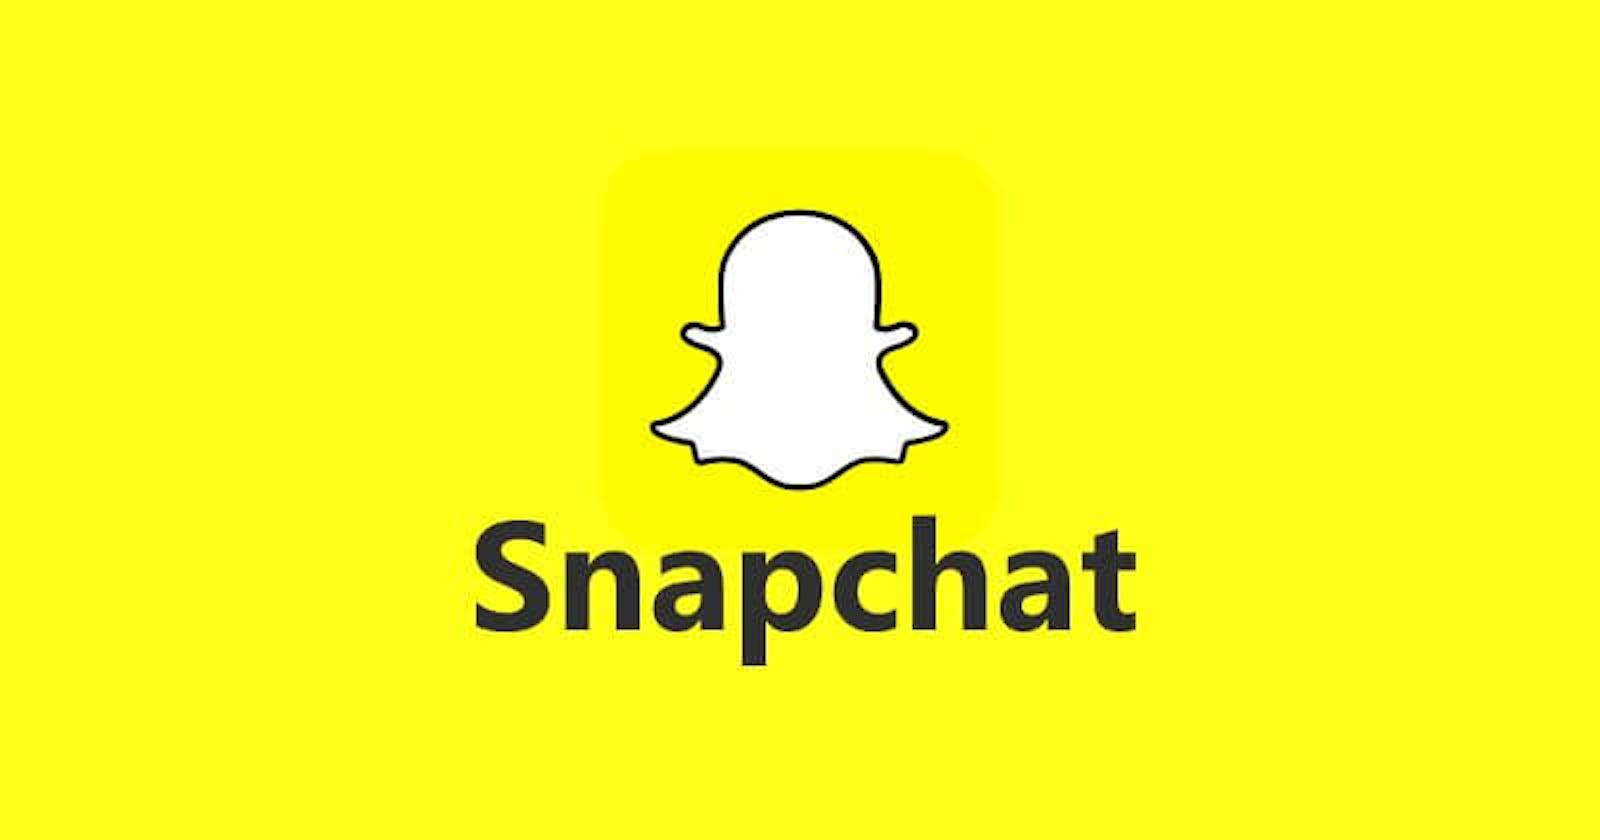 What is Snapchat and How does Snapchat work?